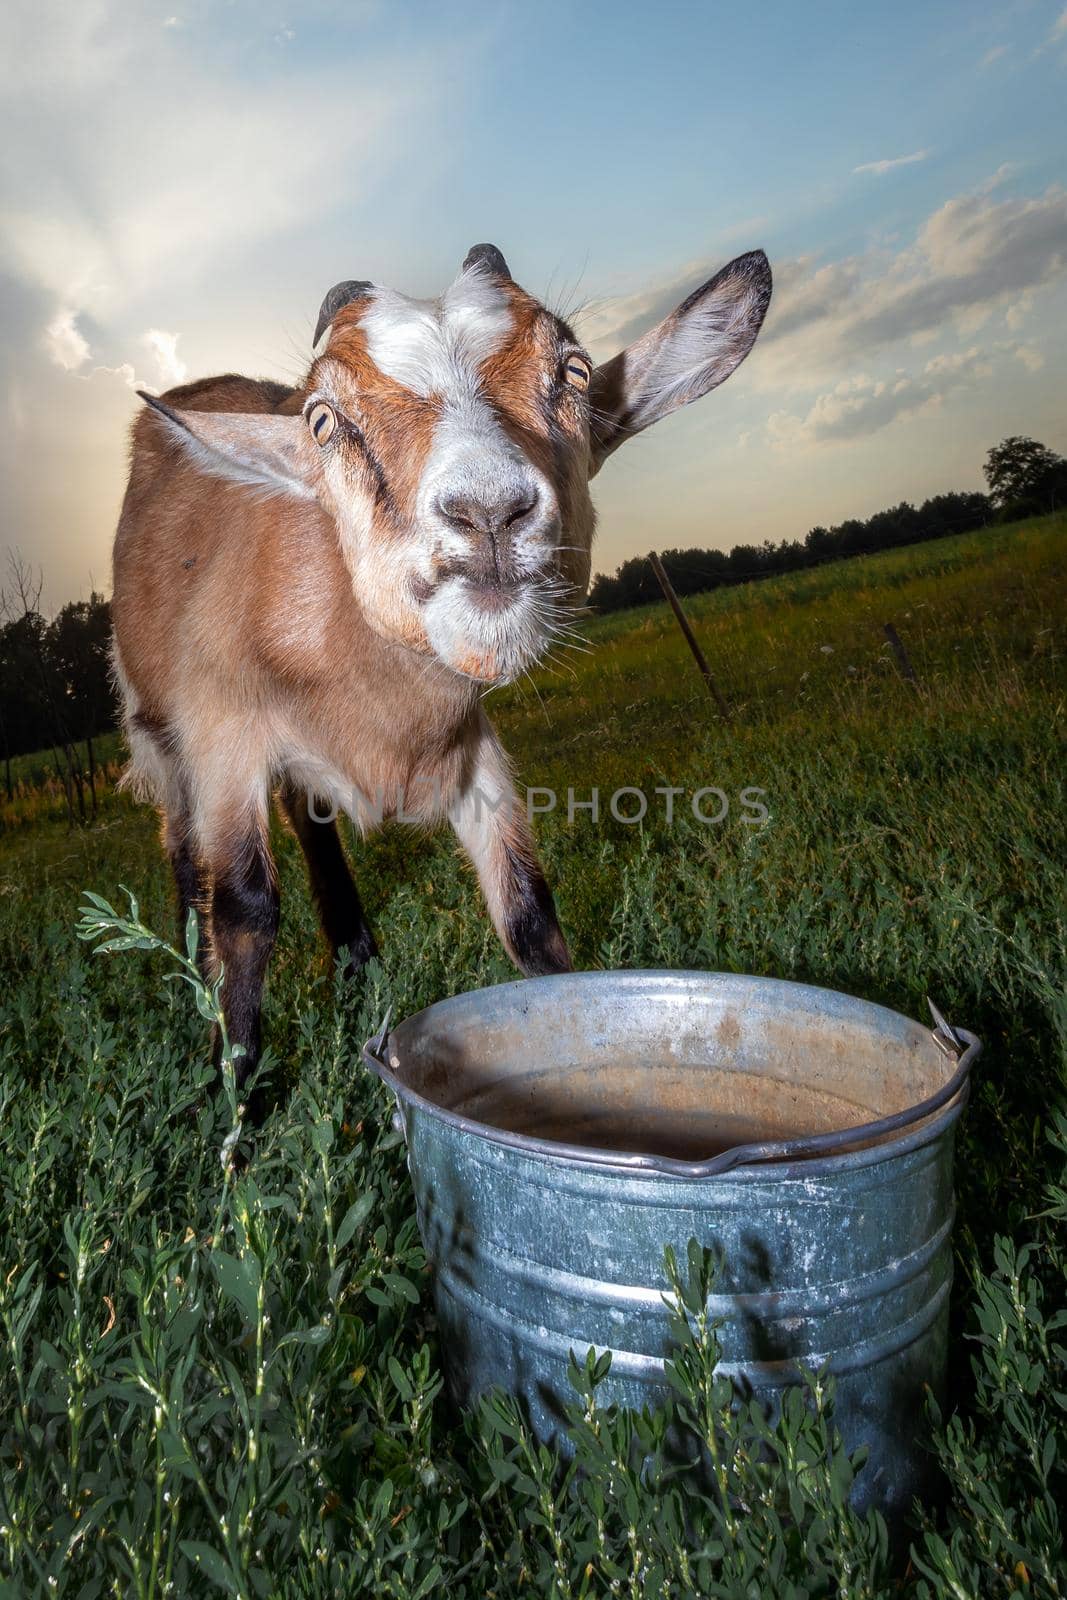 Angry goat in the evening and empty bucket